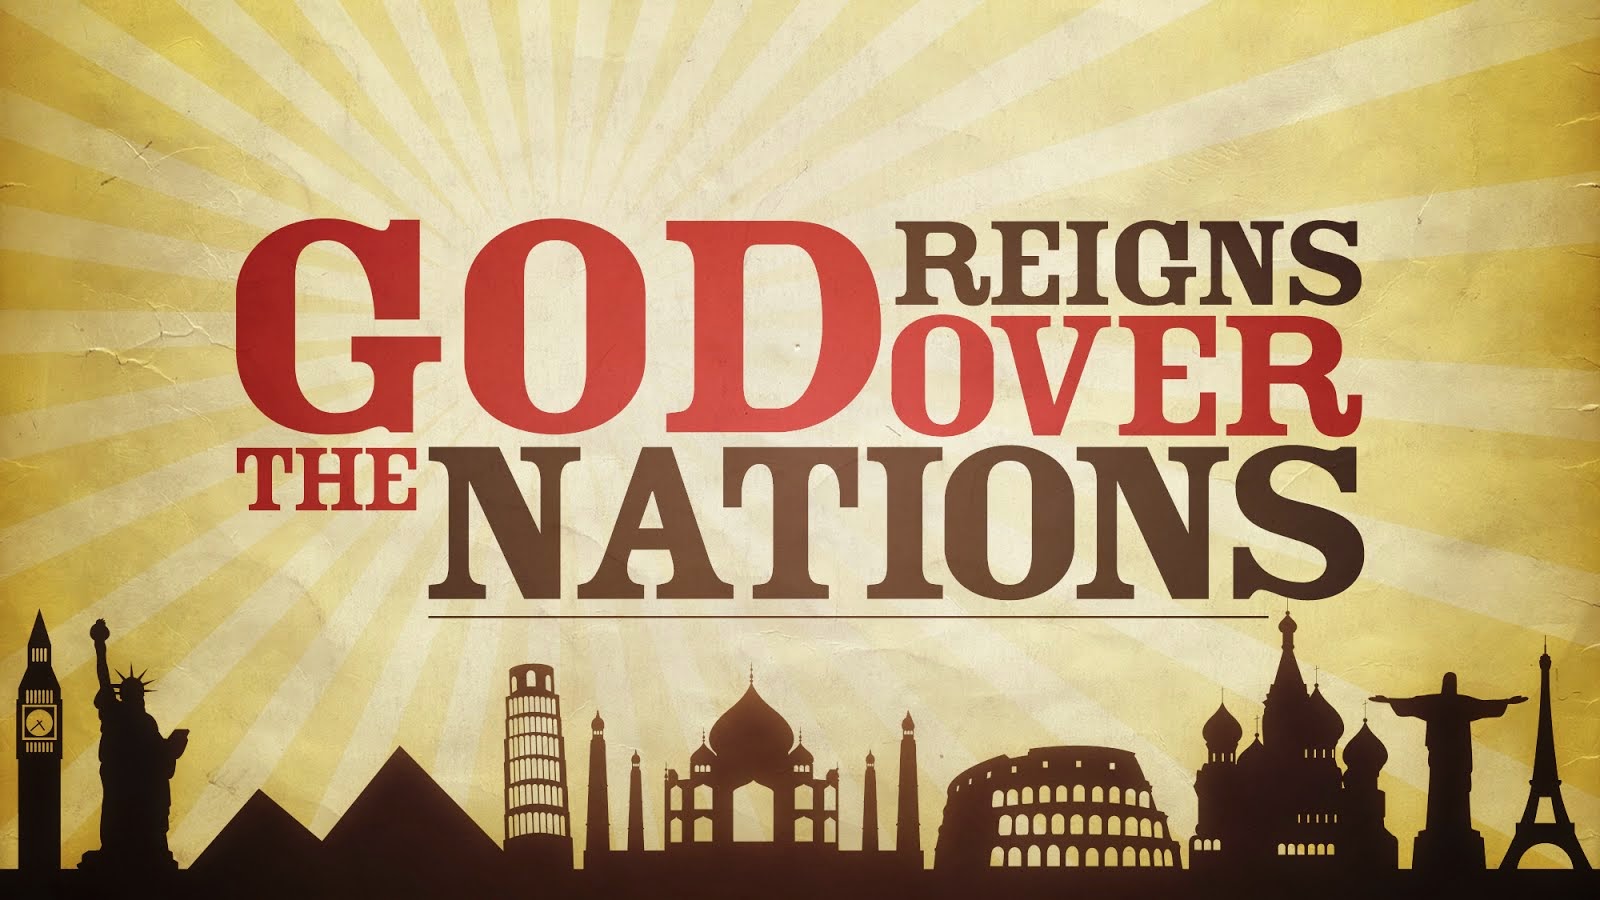 GOD REIGNS OVER THE NATIONS